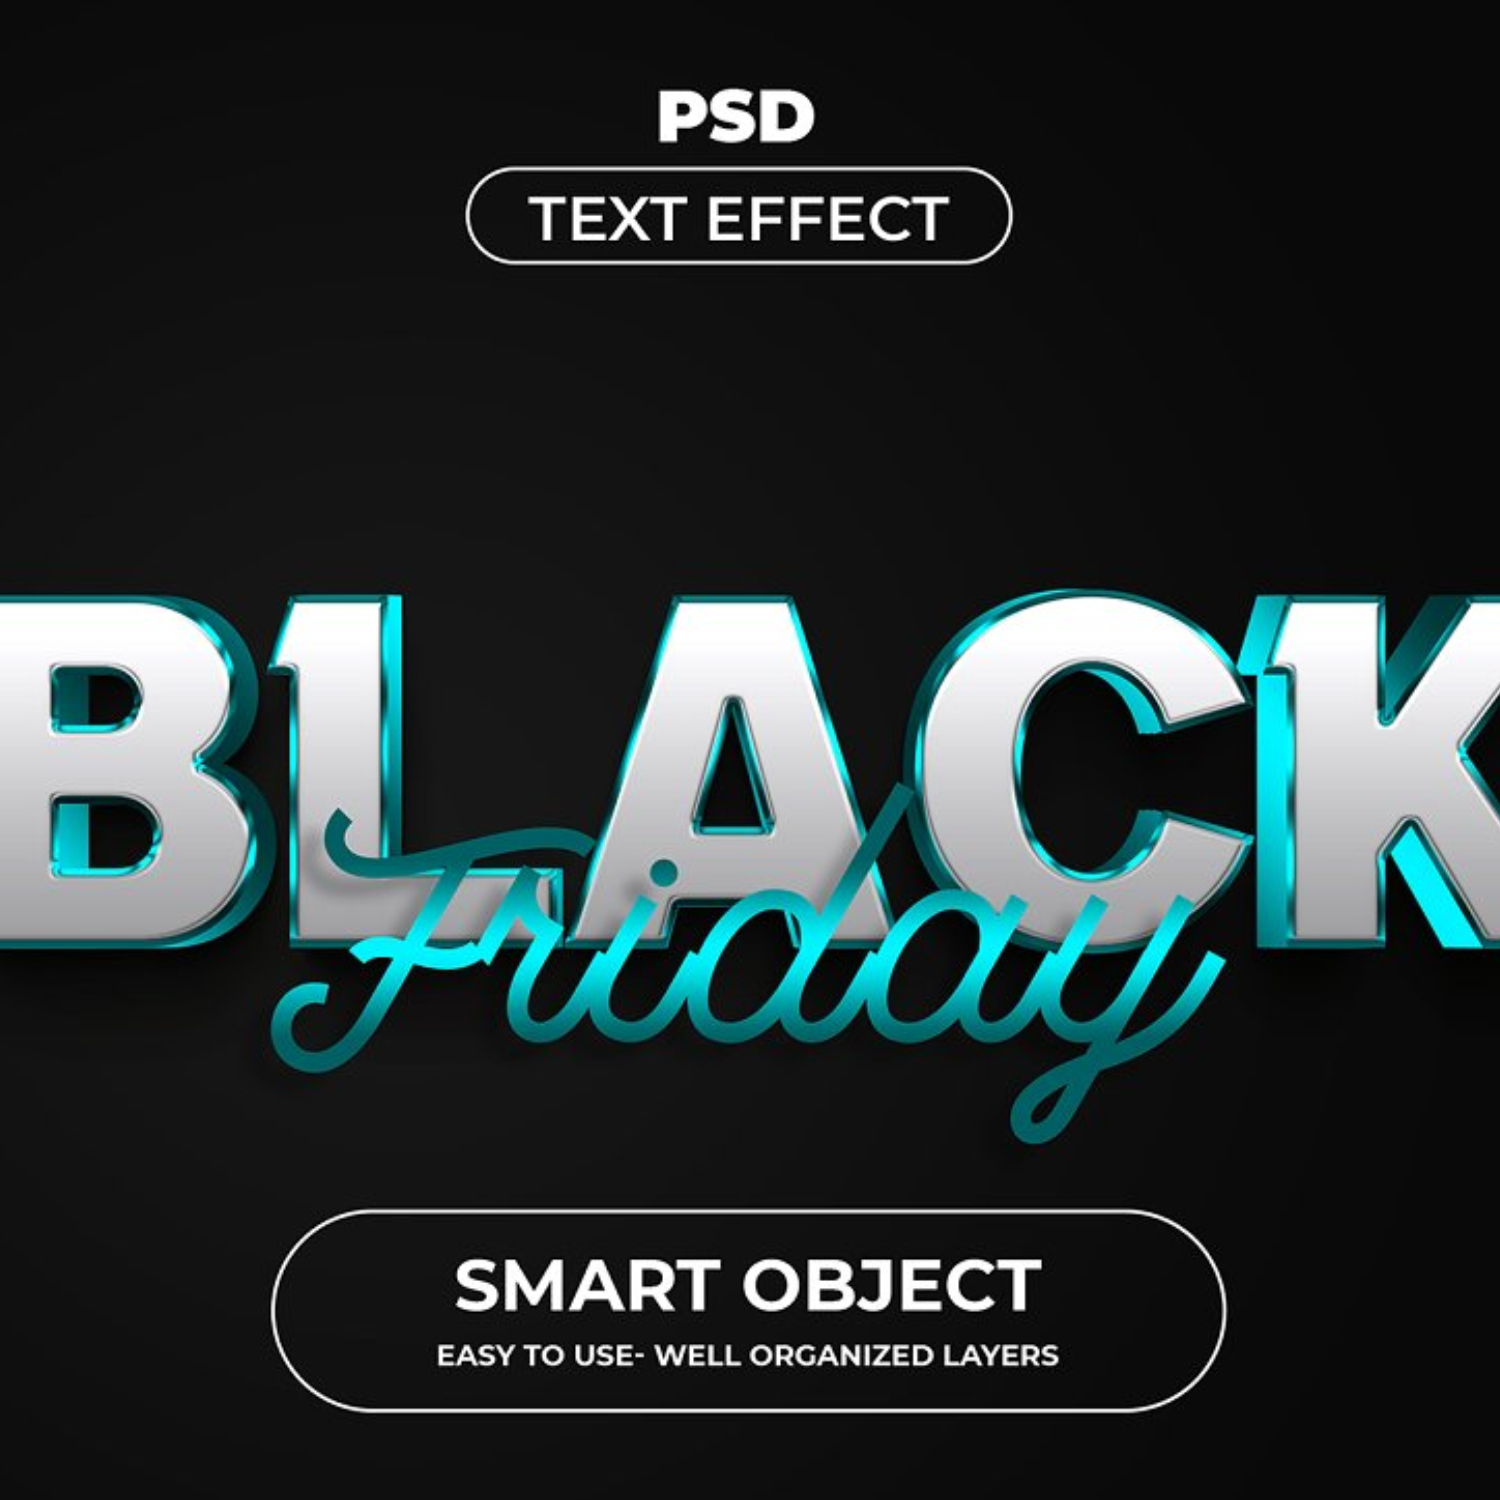 Black friday text effect with a black background.